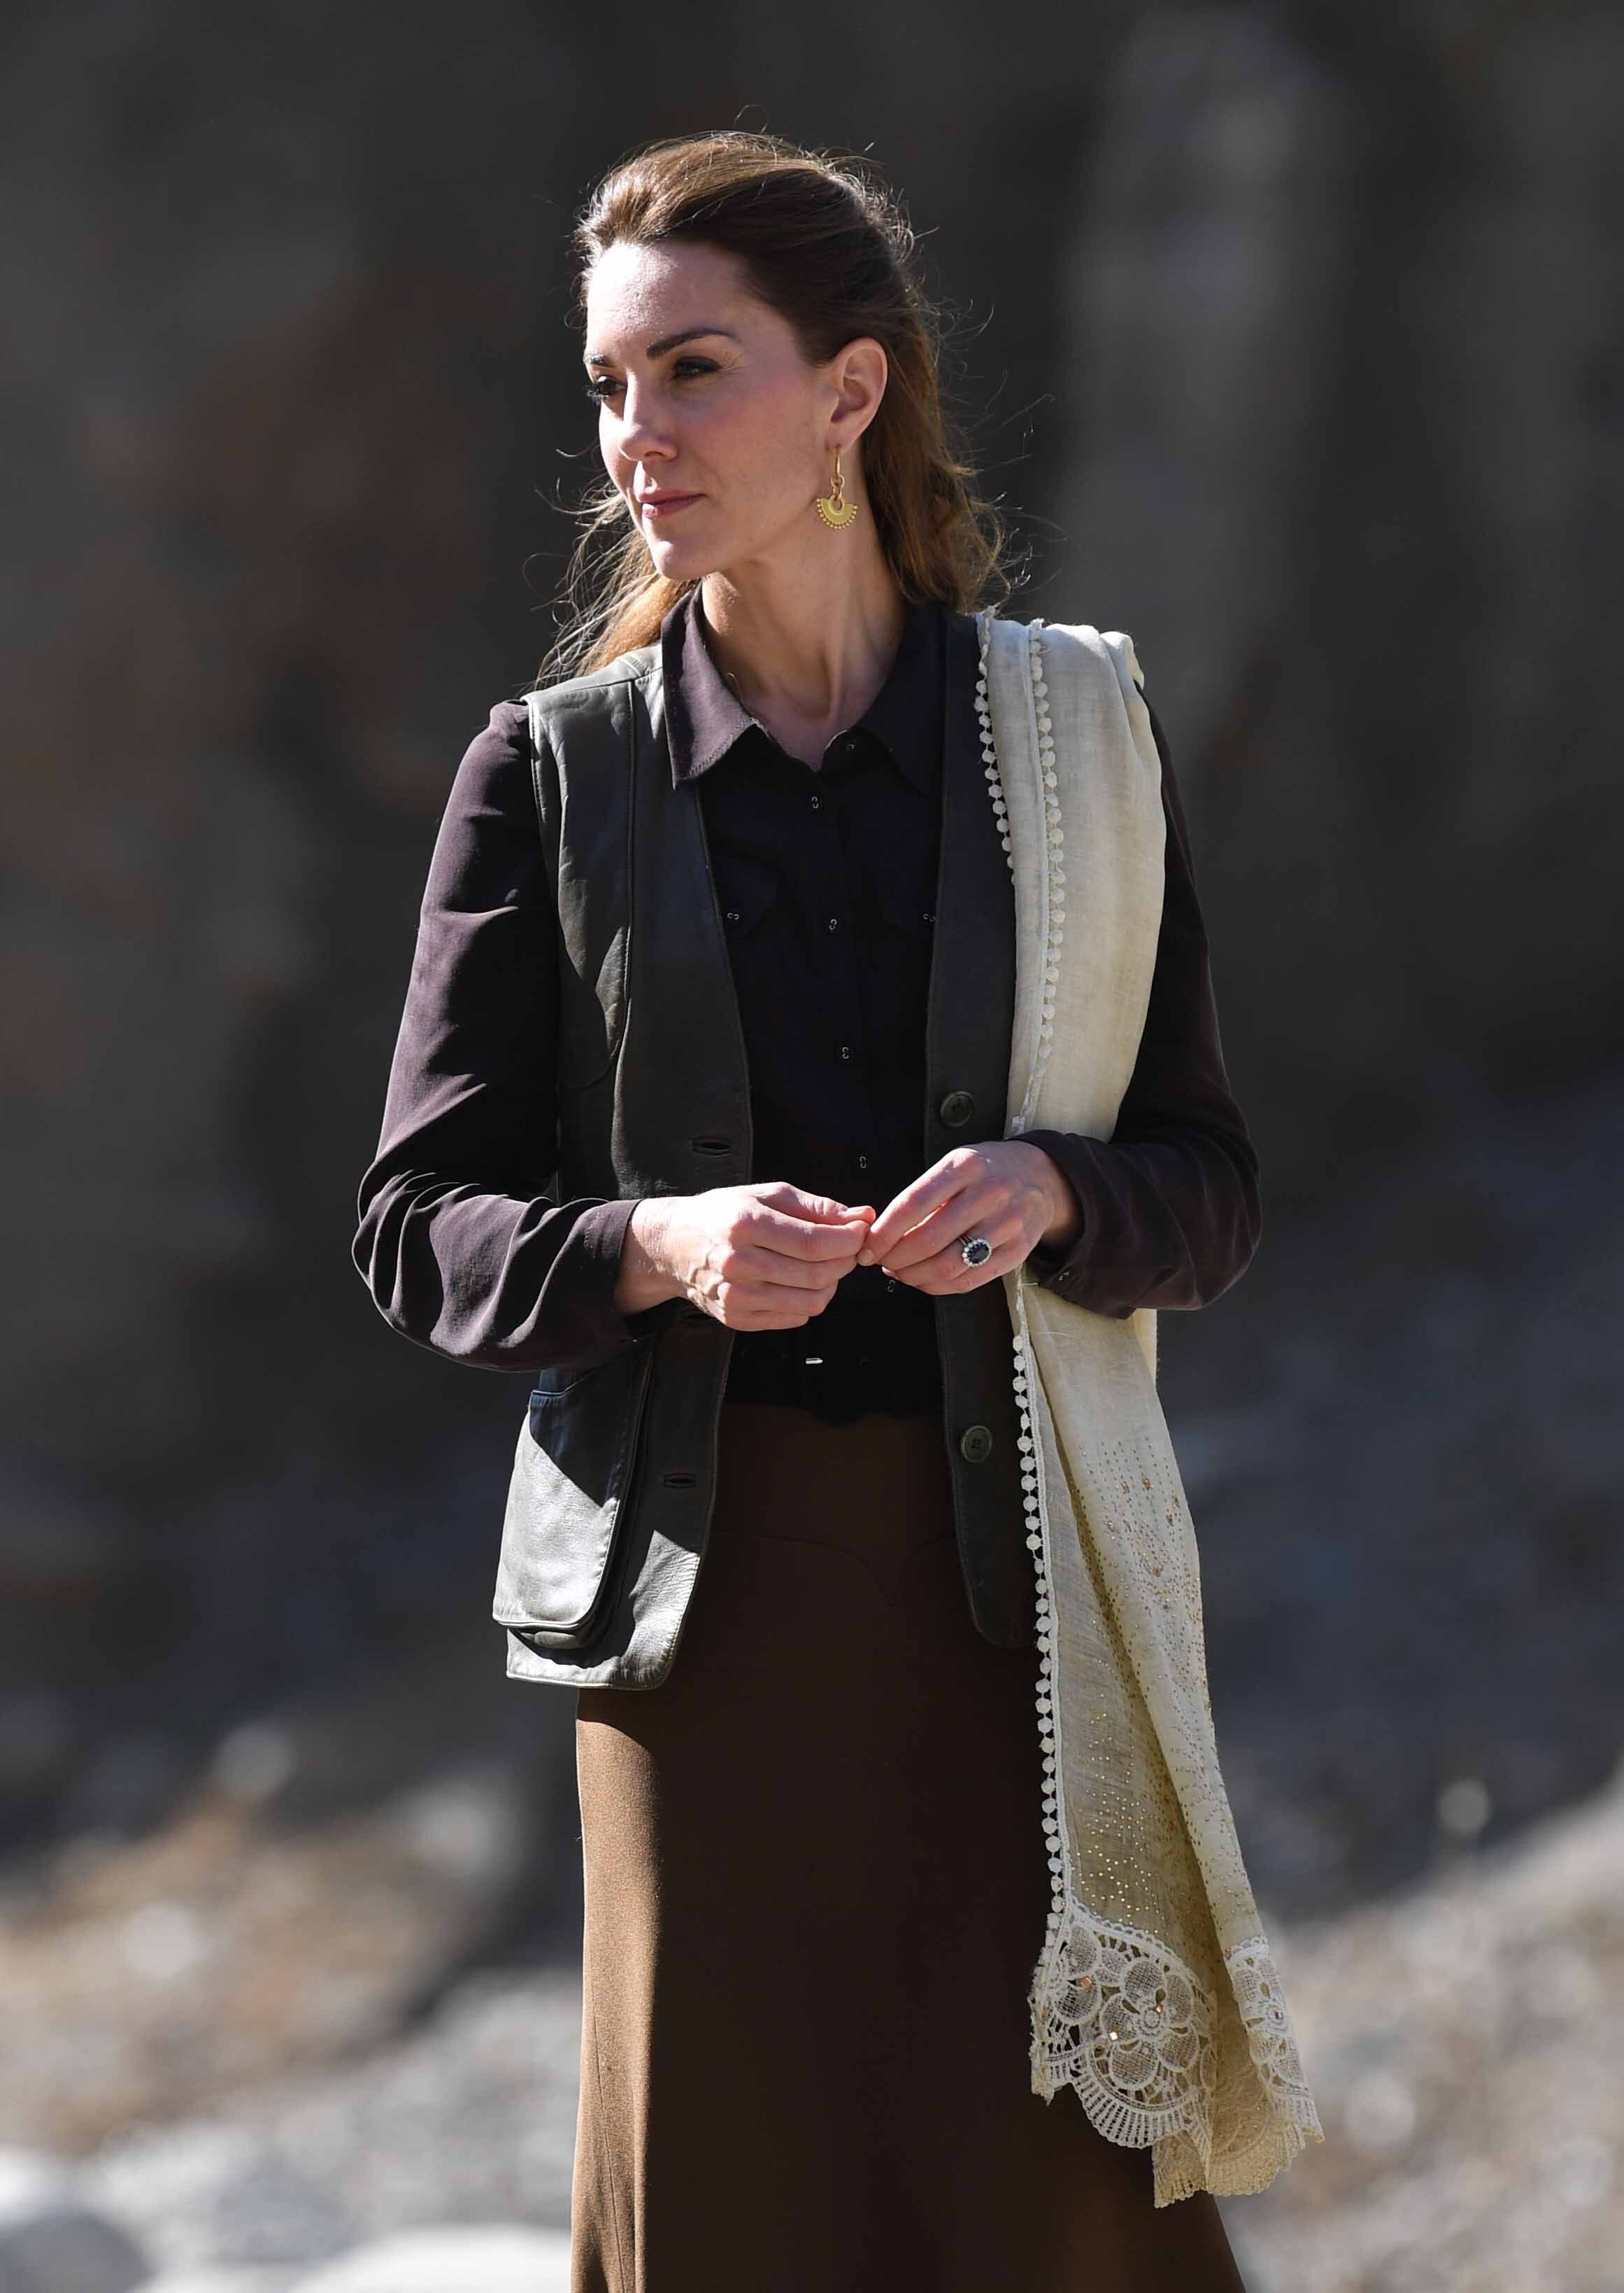 Kate Middleton tours the glaciers in Pakistan. | Source: Getty Images